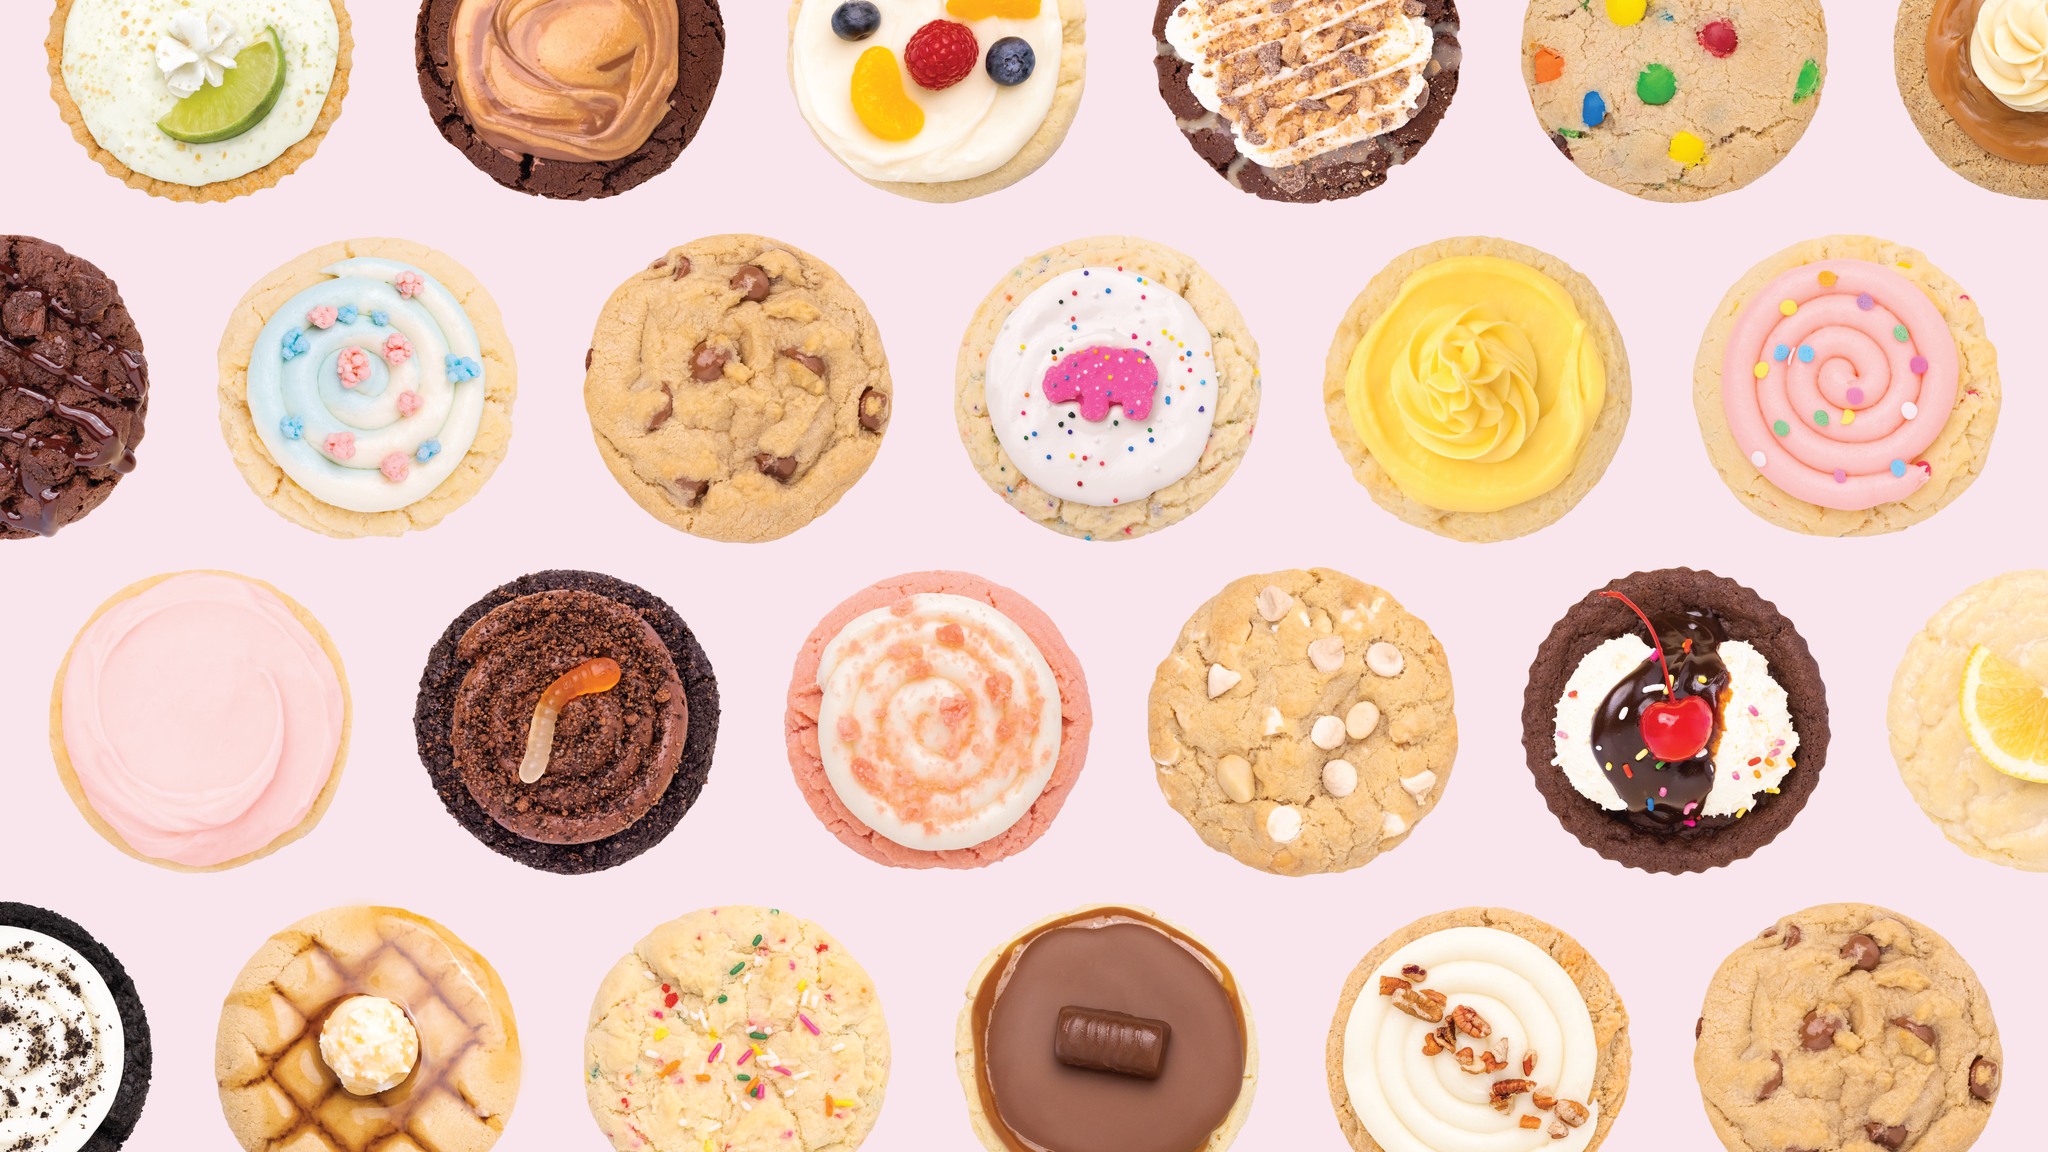 Crumbl to Open Cookie Bakery in Frisco